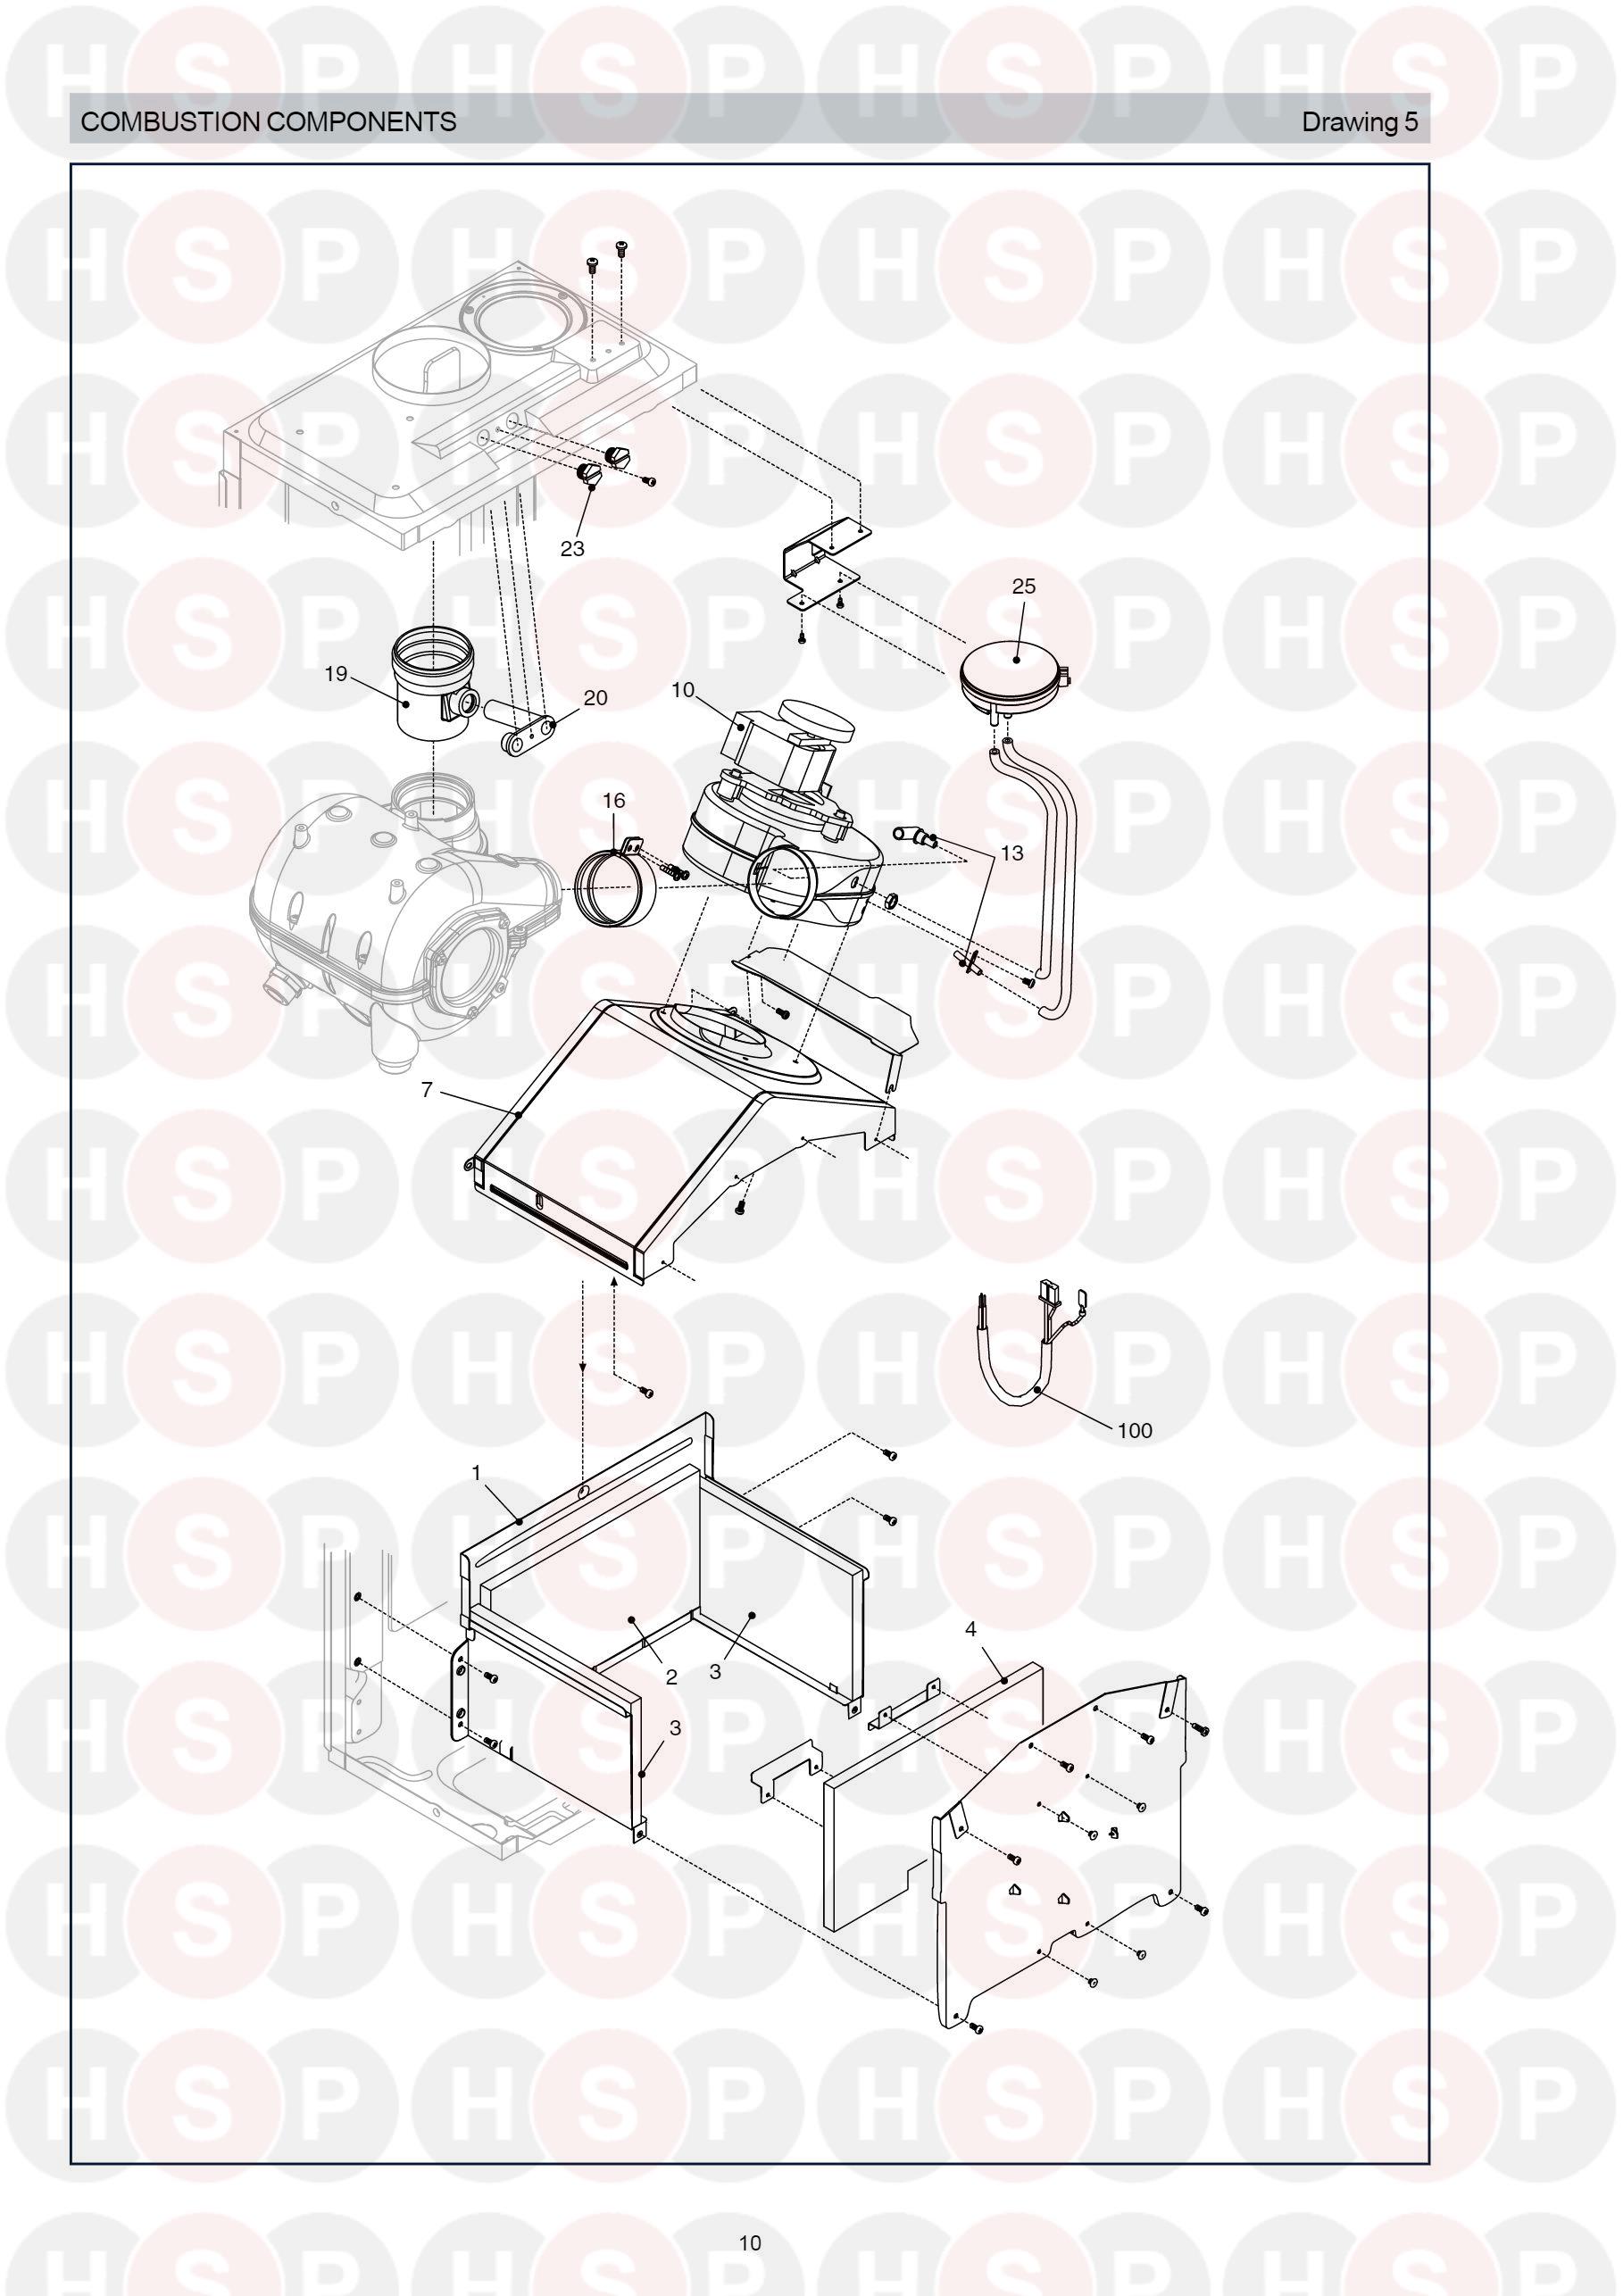 Combustion Components diagram for Vokera Synergy 29 LPG Rev 4 (03/2007)